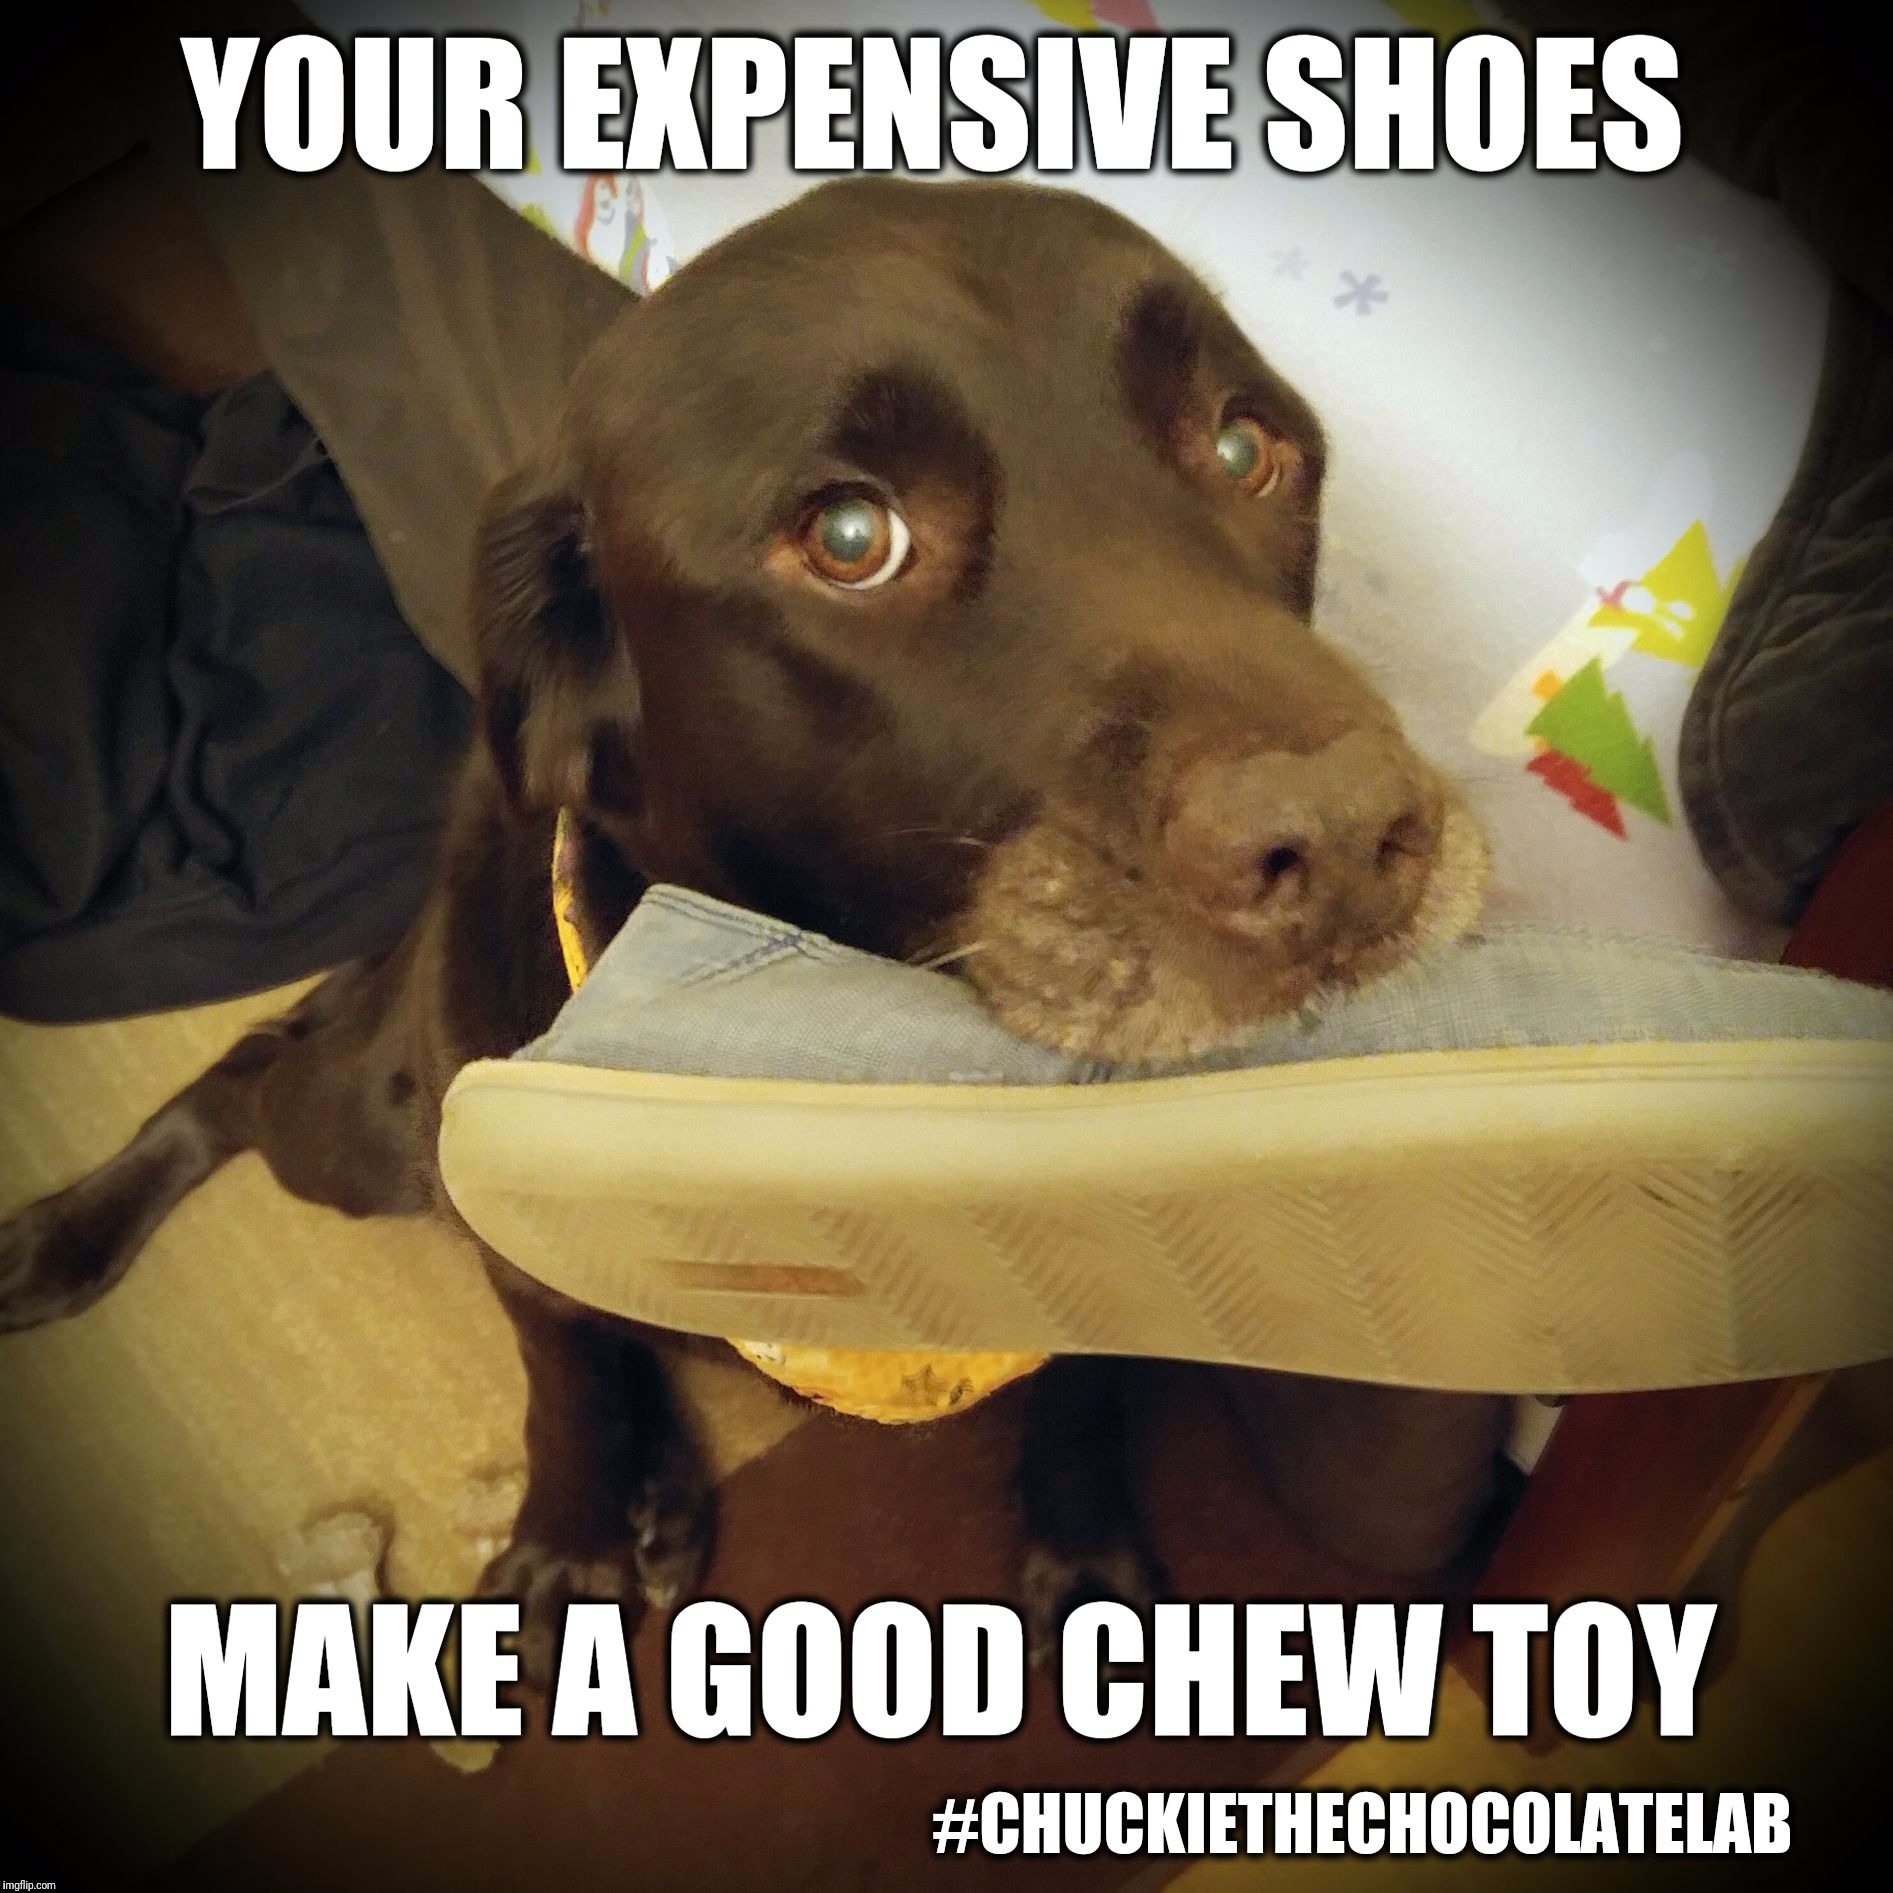 Your expensive shoes make a good chew toy  | YOUR EXPENSIVE SHOES; MAKE A GOOD CHEW TOY; #CHUCKIETHECHOCOLATELAB | image tagged in chuckie the chocolate lab,shoes,funny,dog memes,memes,labrador | made w/ Imgflip meme maker